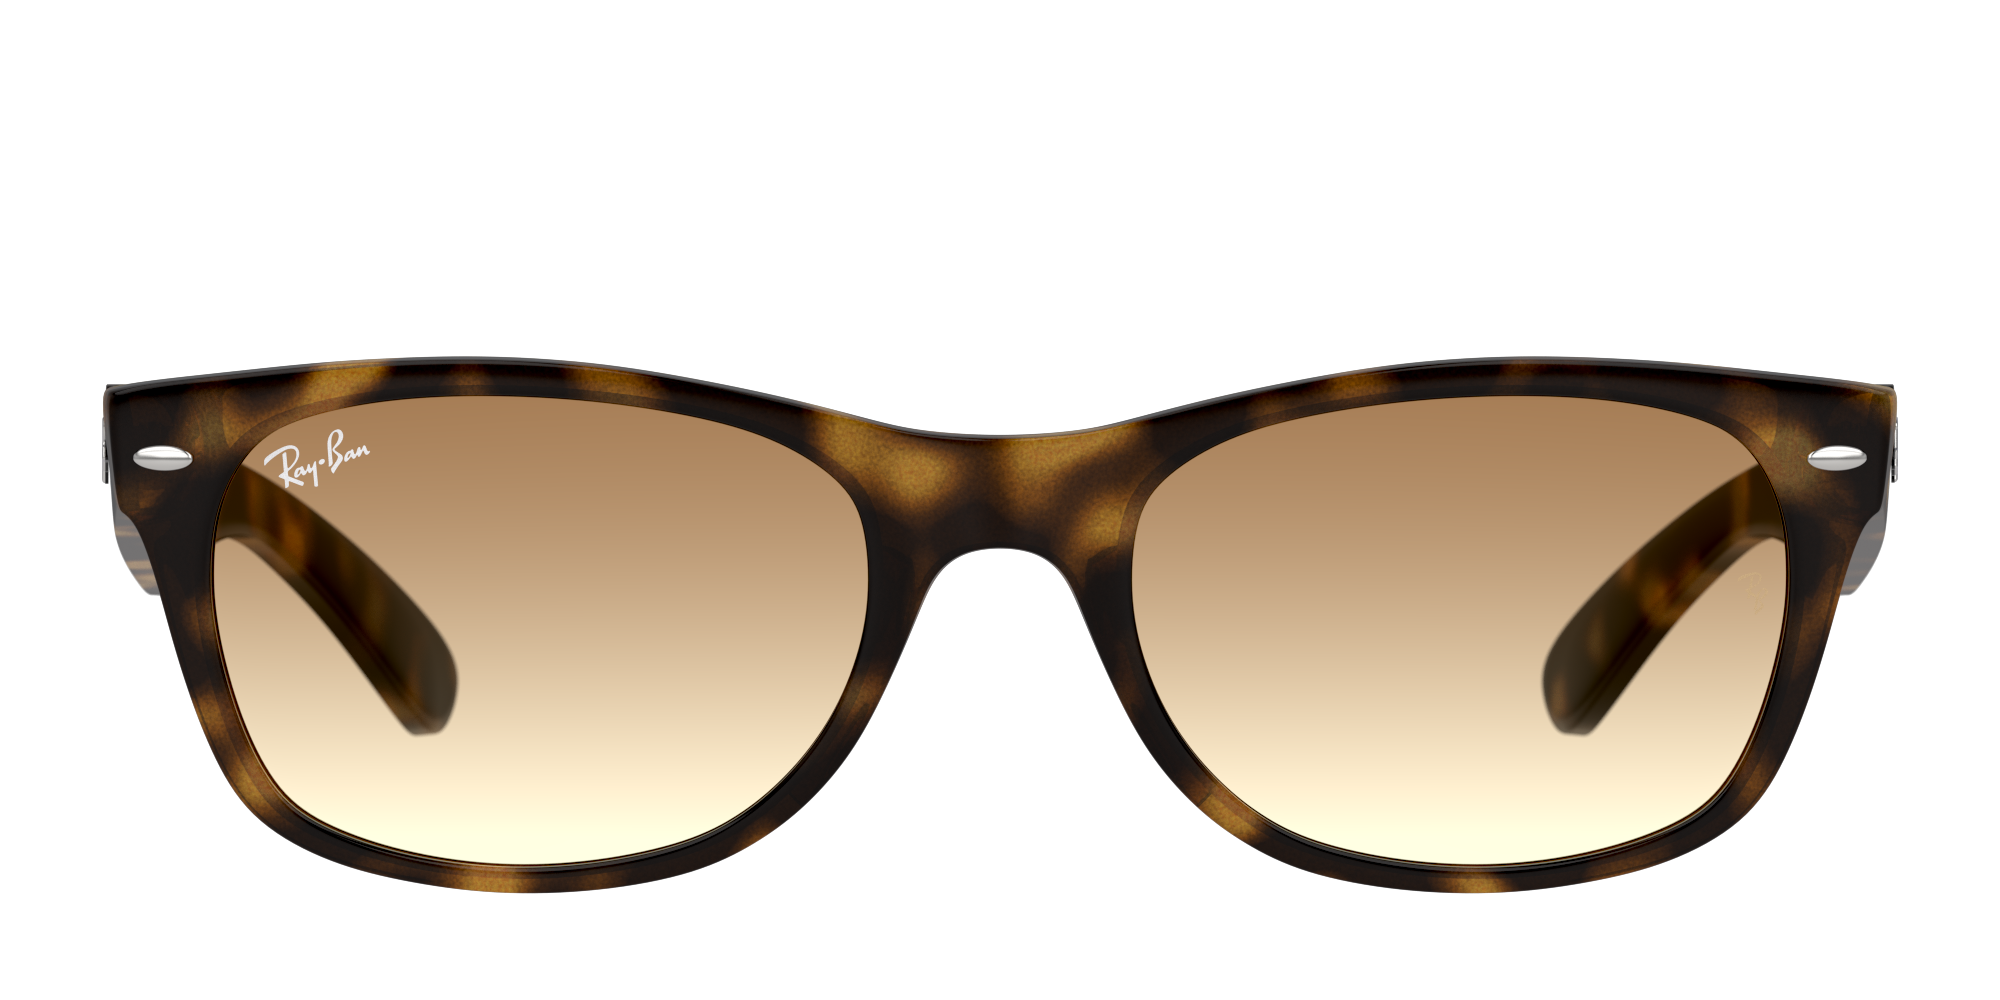 [products.image.front] RAY-BAN RB2132 710/51